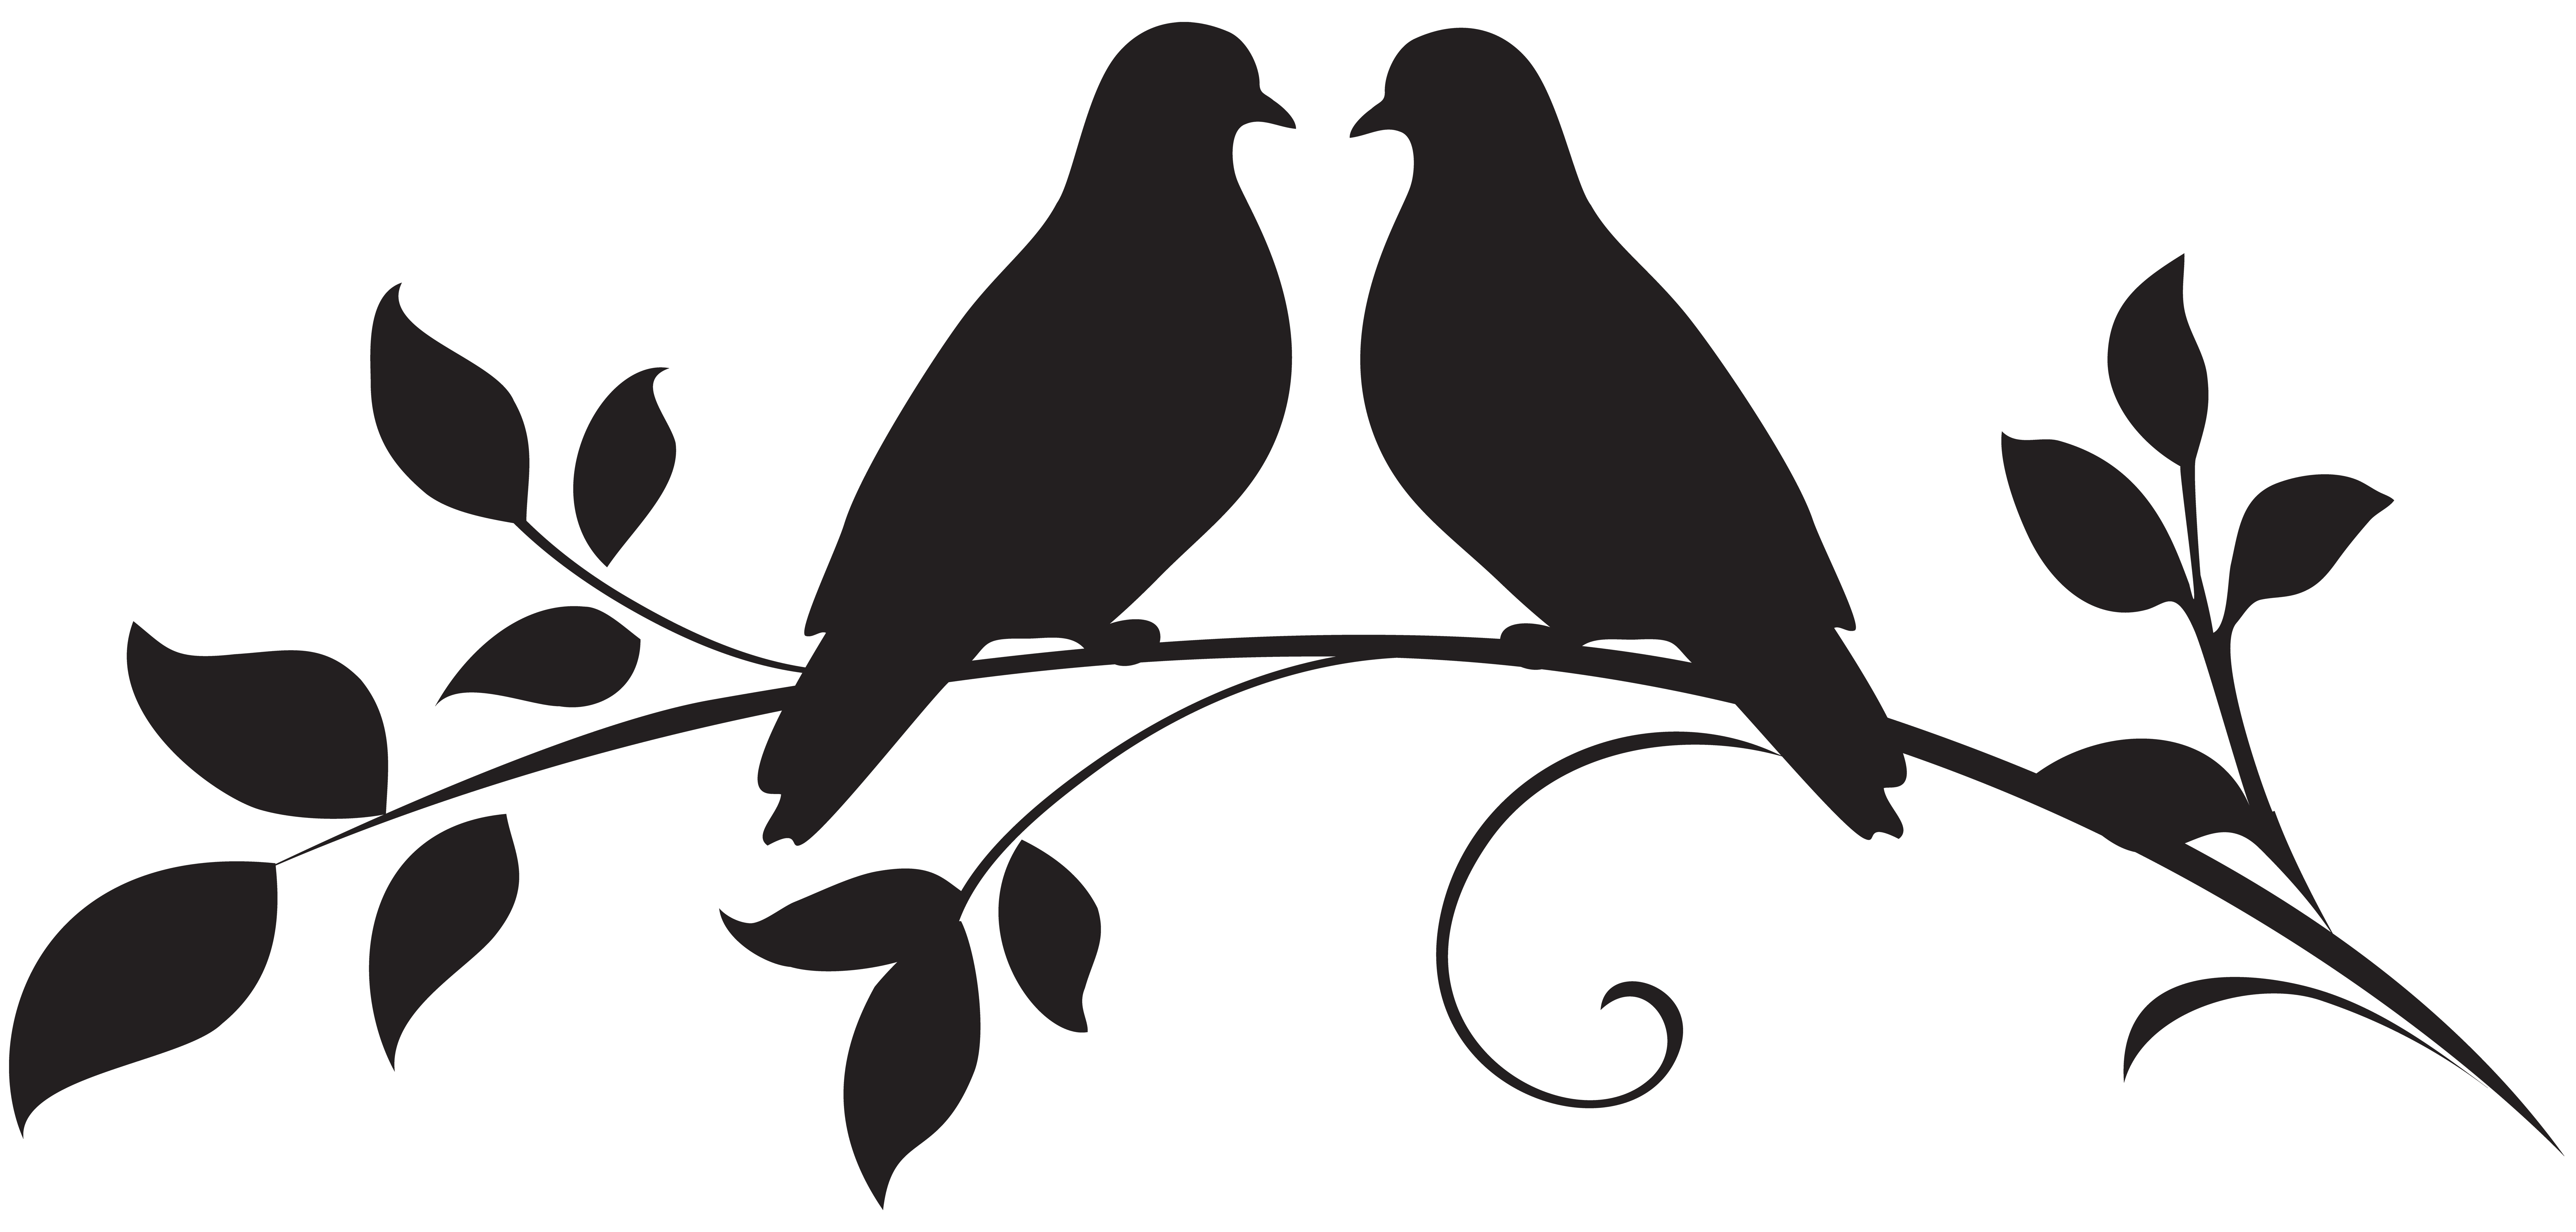 Dove Silhouette Png